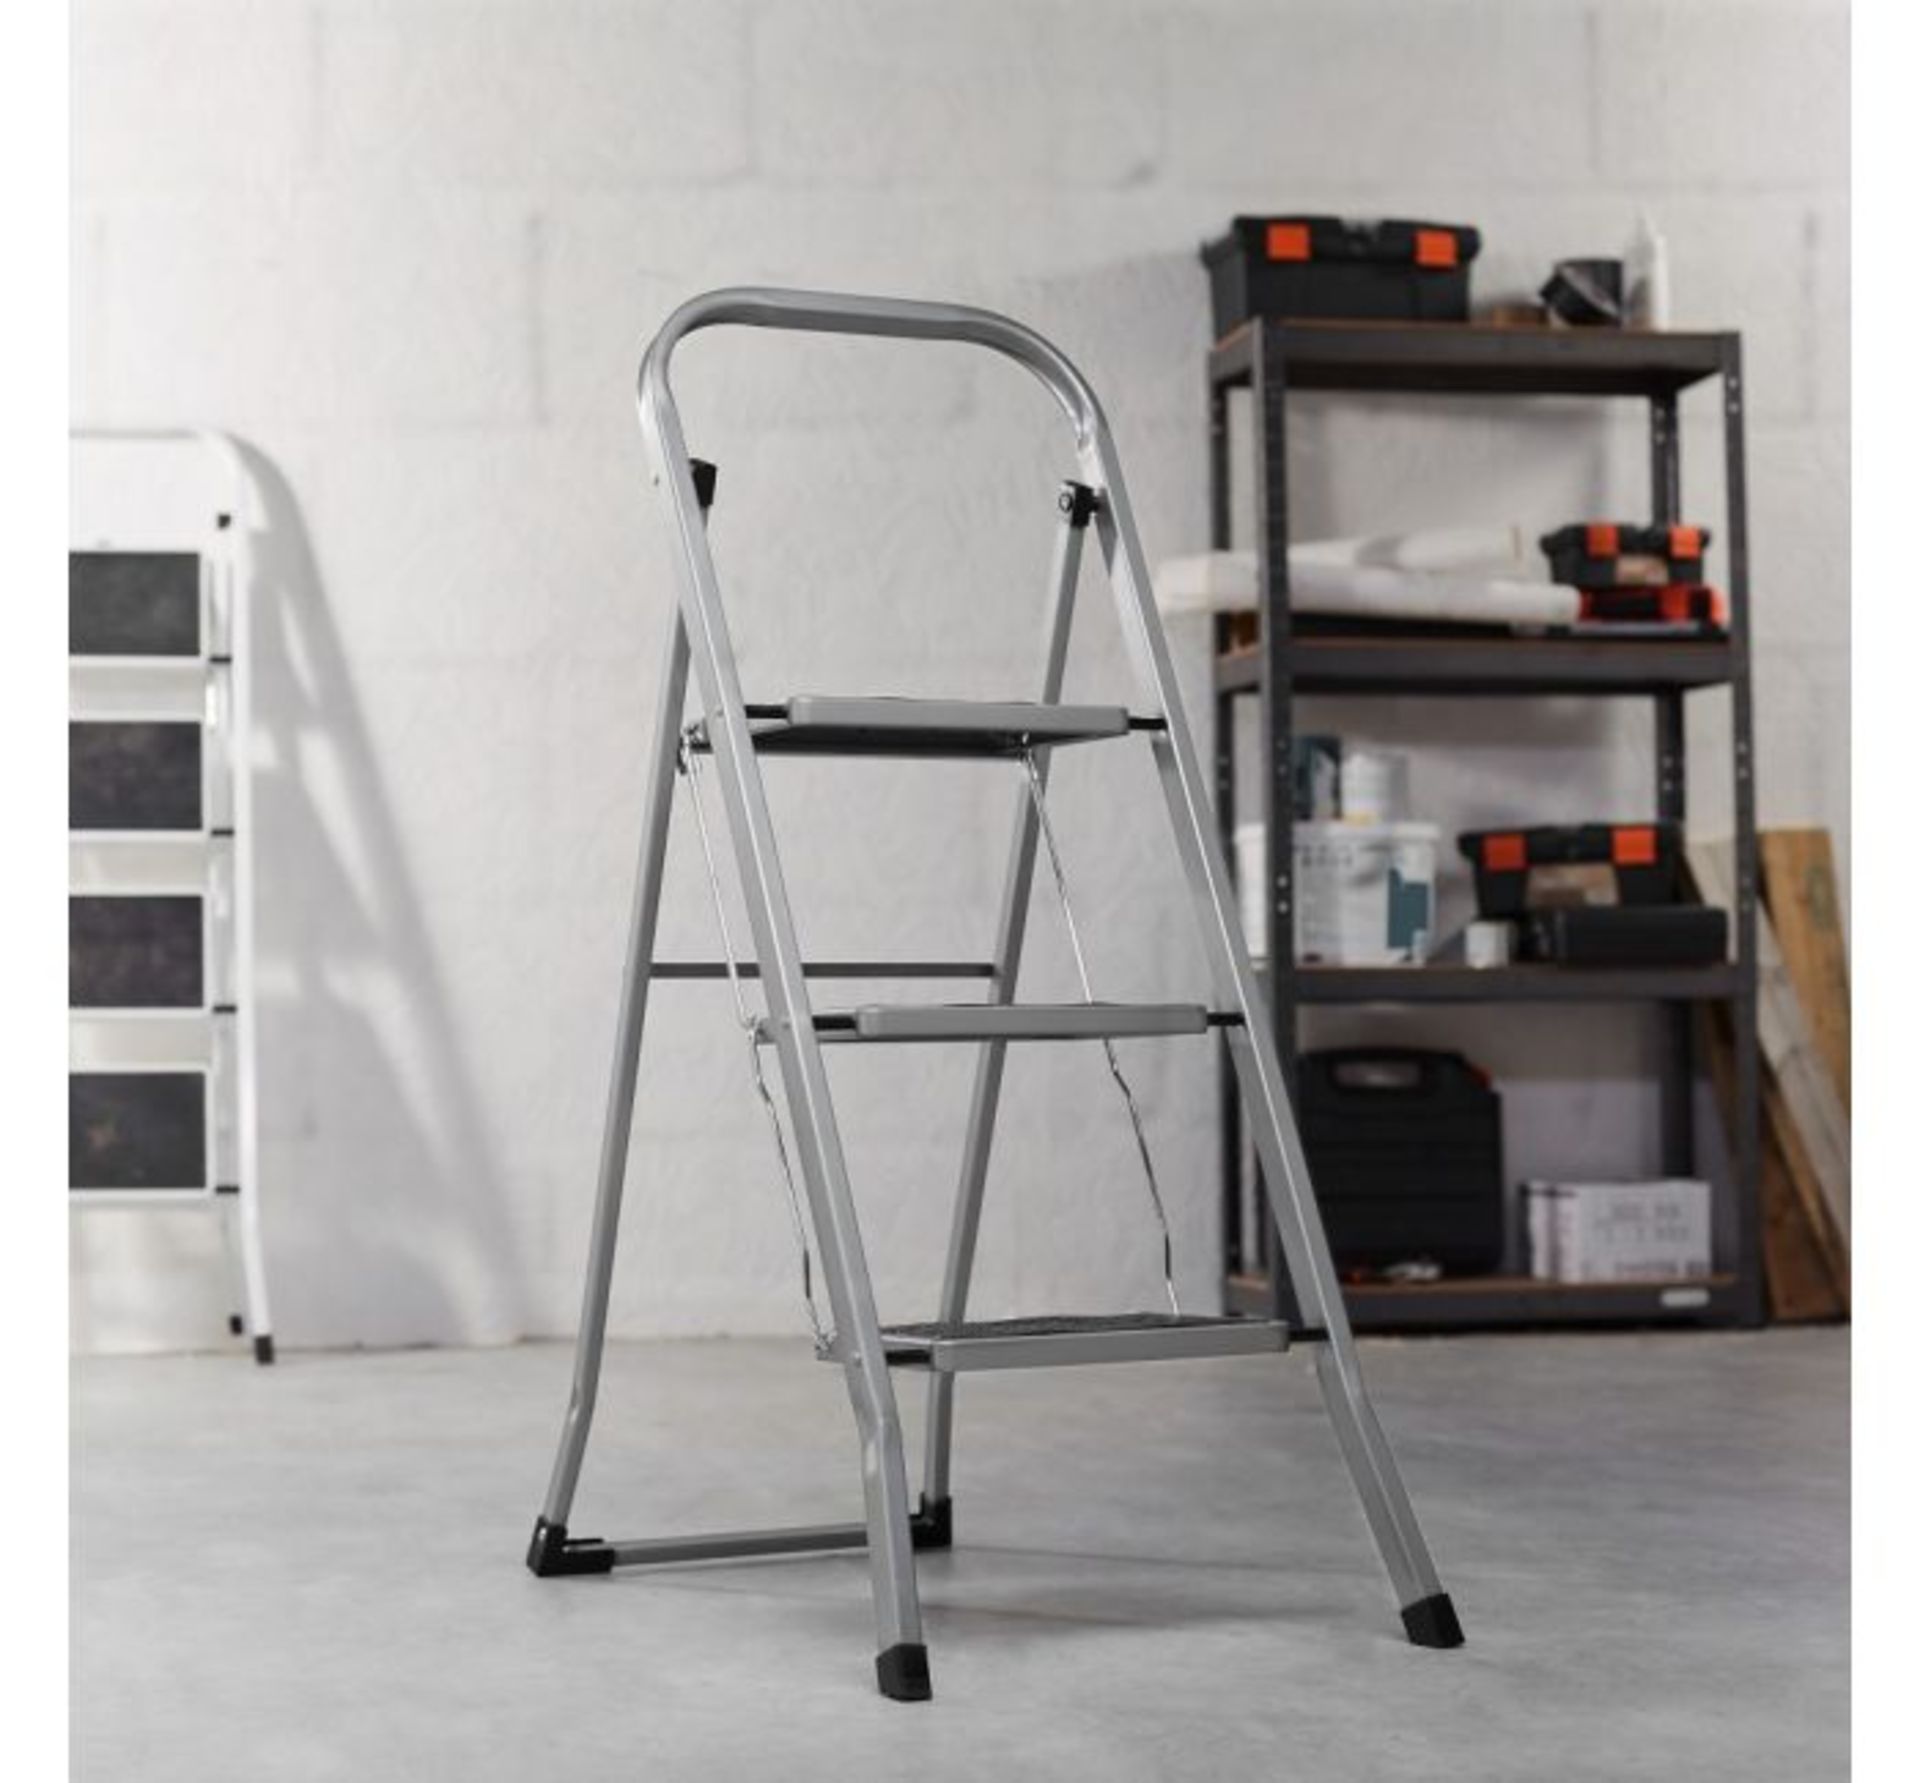 (HZ40) 3 Step Steel Ladder Durable 3 step steel ladder Distributes weight evenly for total st...